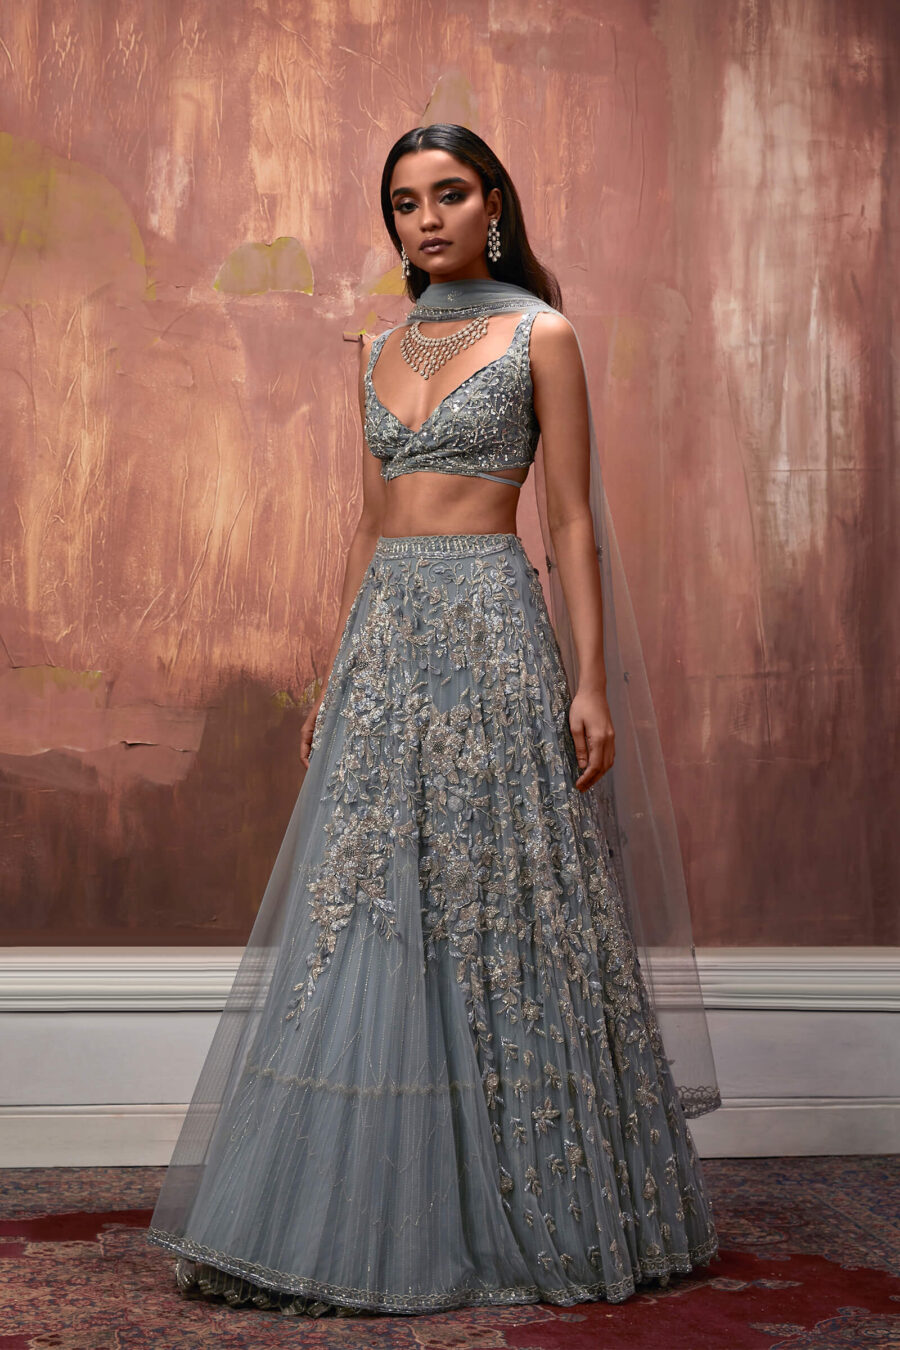 Jazz Up Your Bridal Look with These Pretty Lehenga Blouse Designs